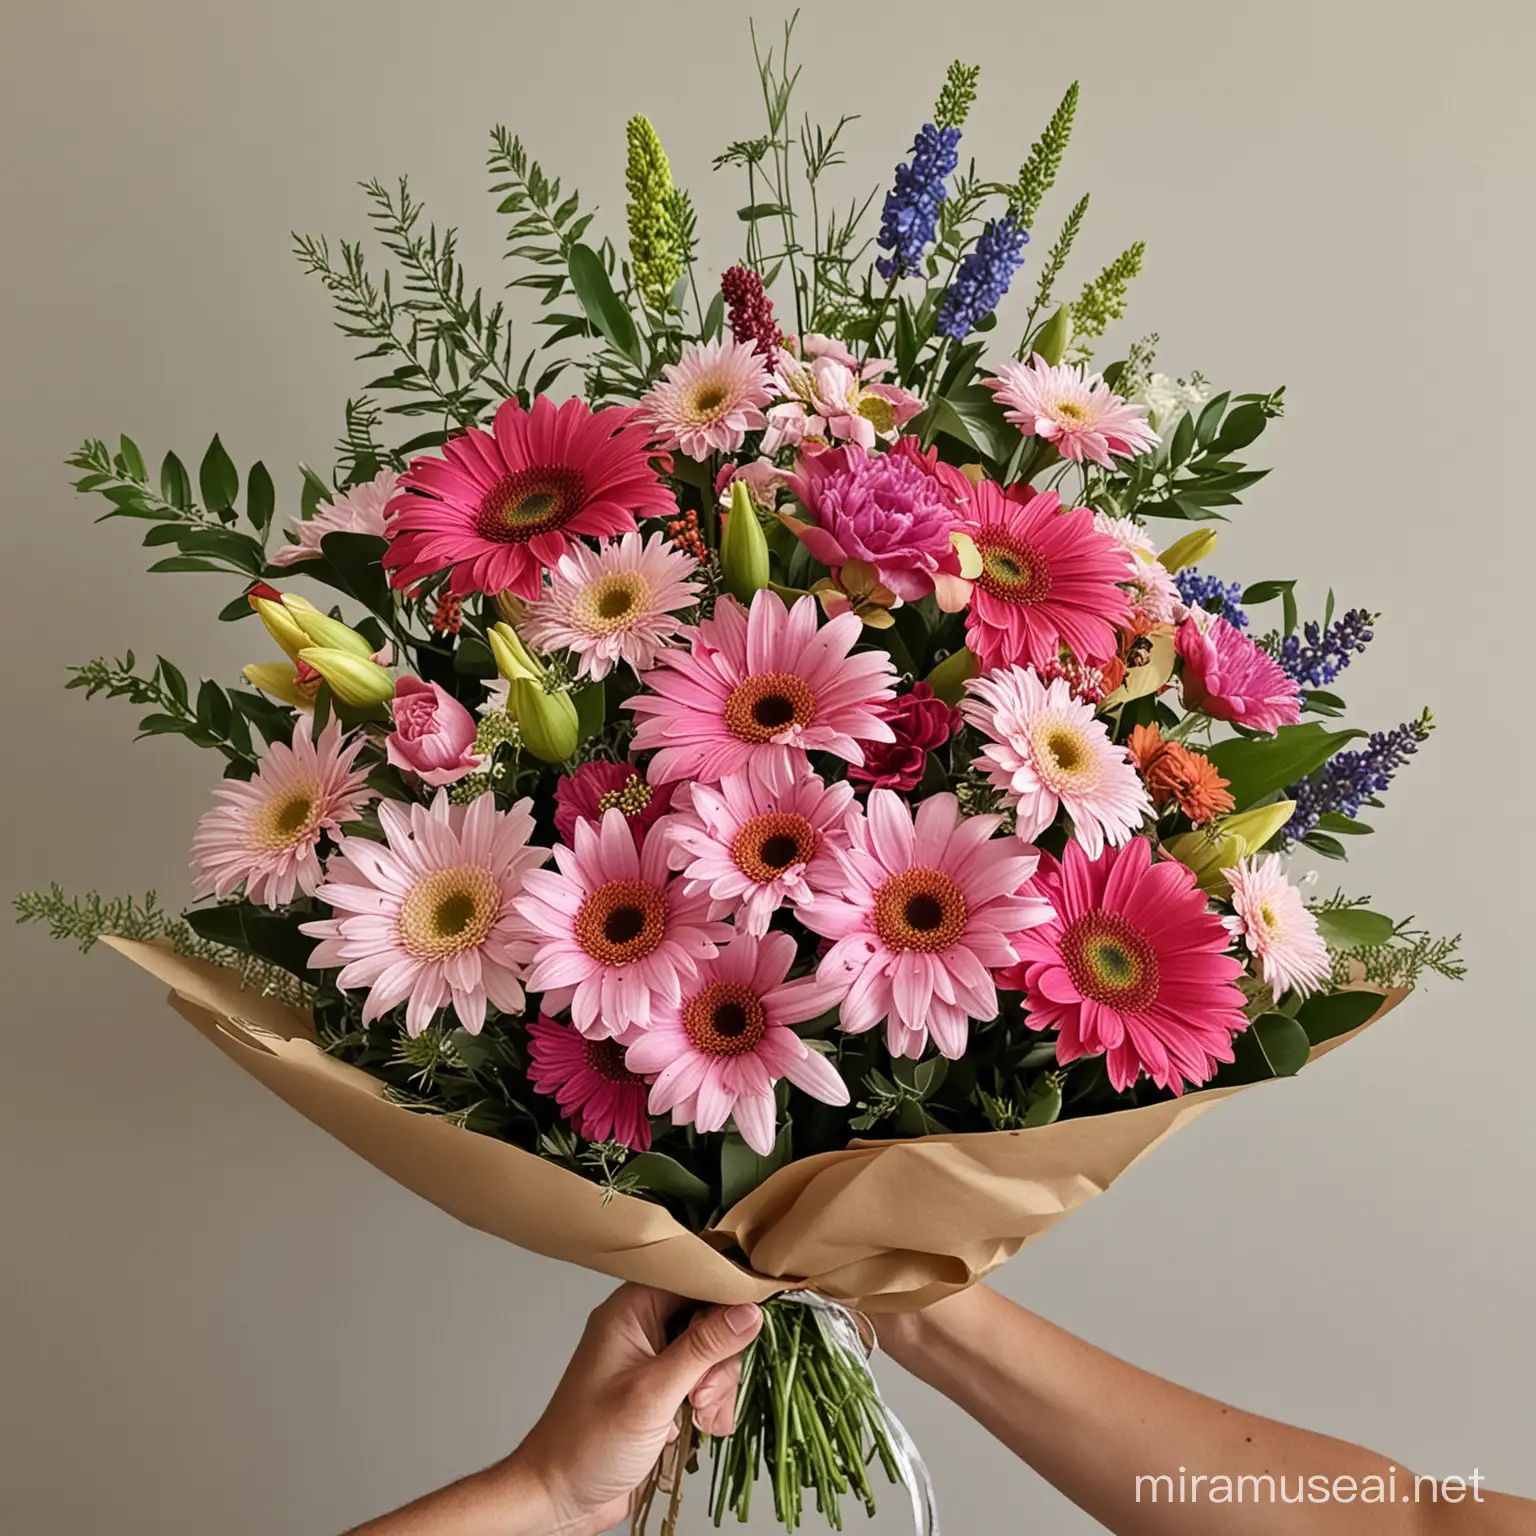 bouquet of birthday flowers for 70th
